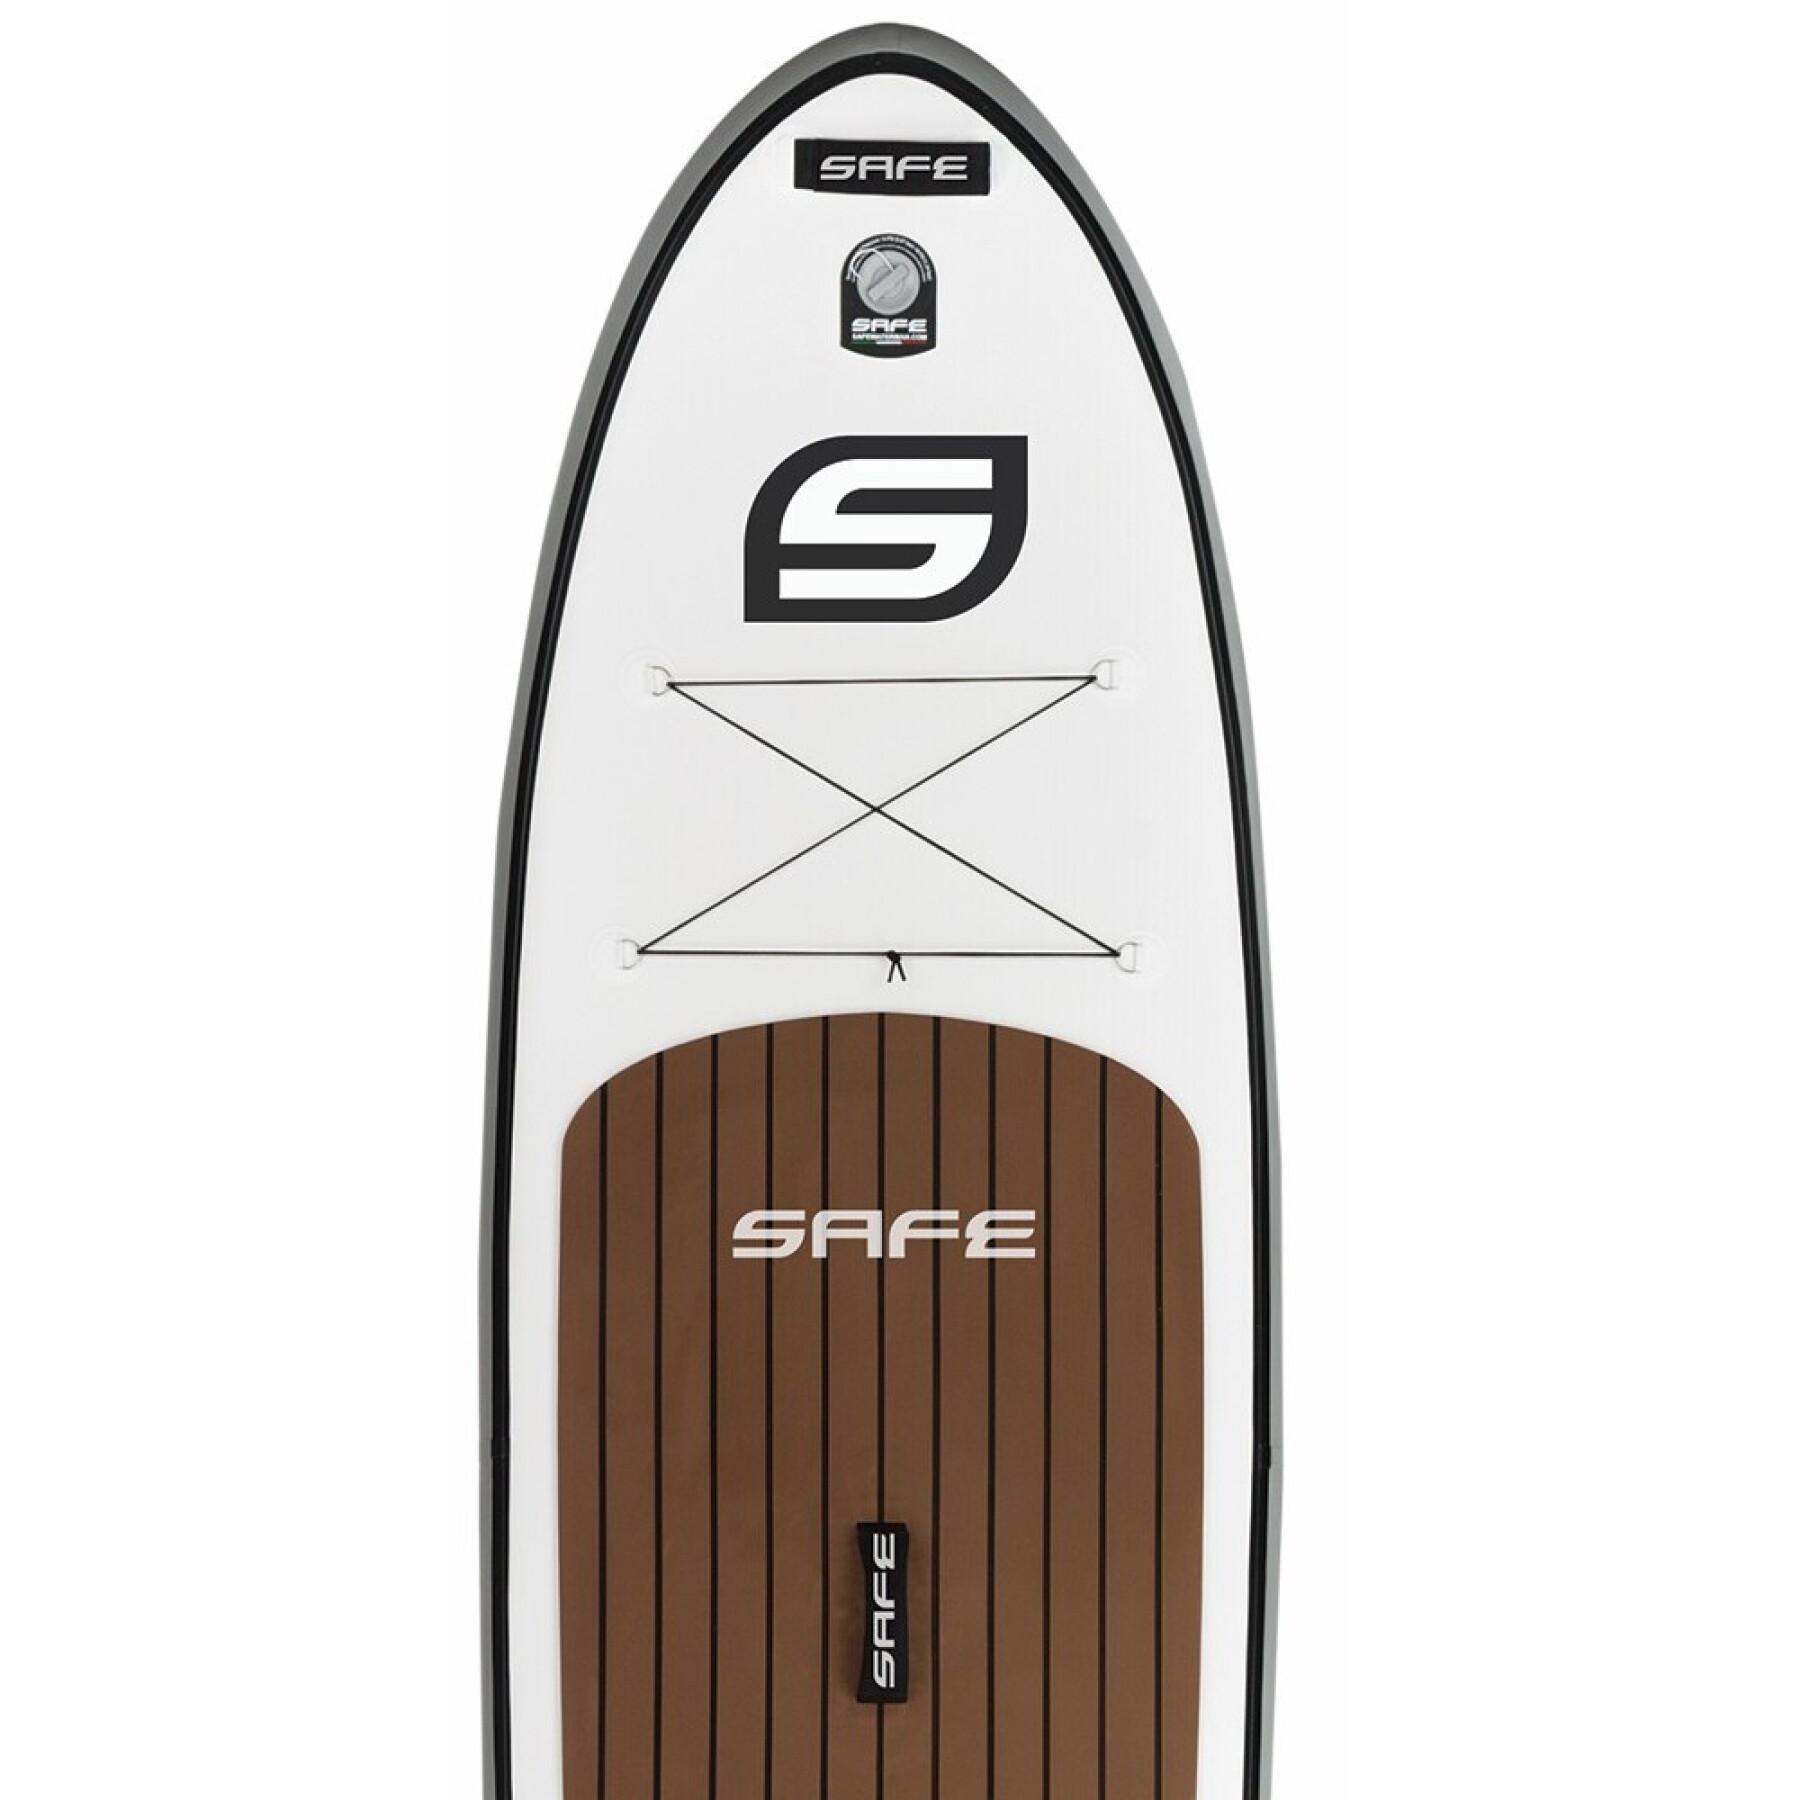 Stand Up Paddle gonflable Safe Waterman Nautic All round – 10’6